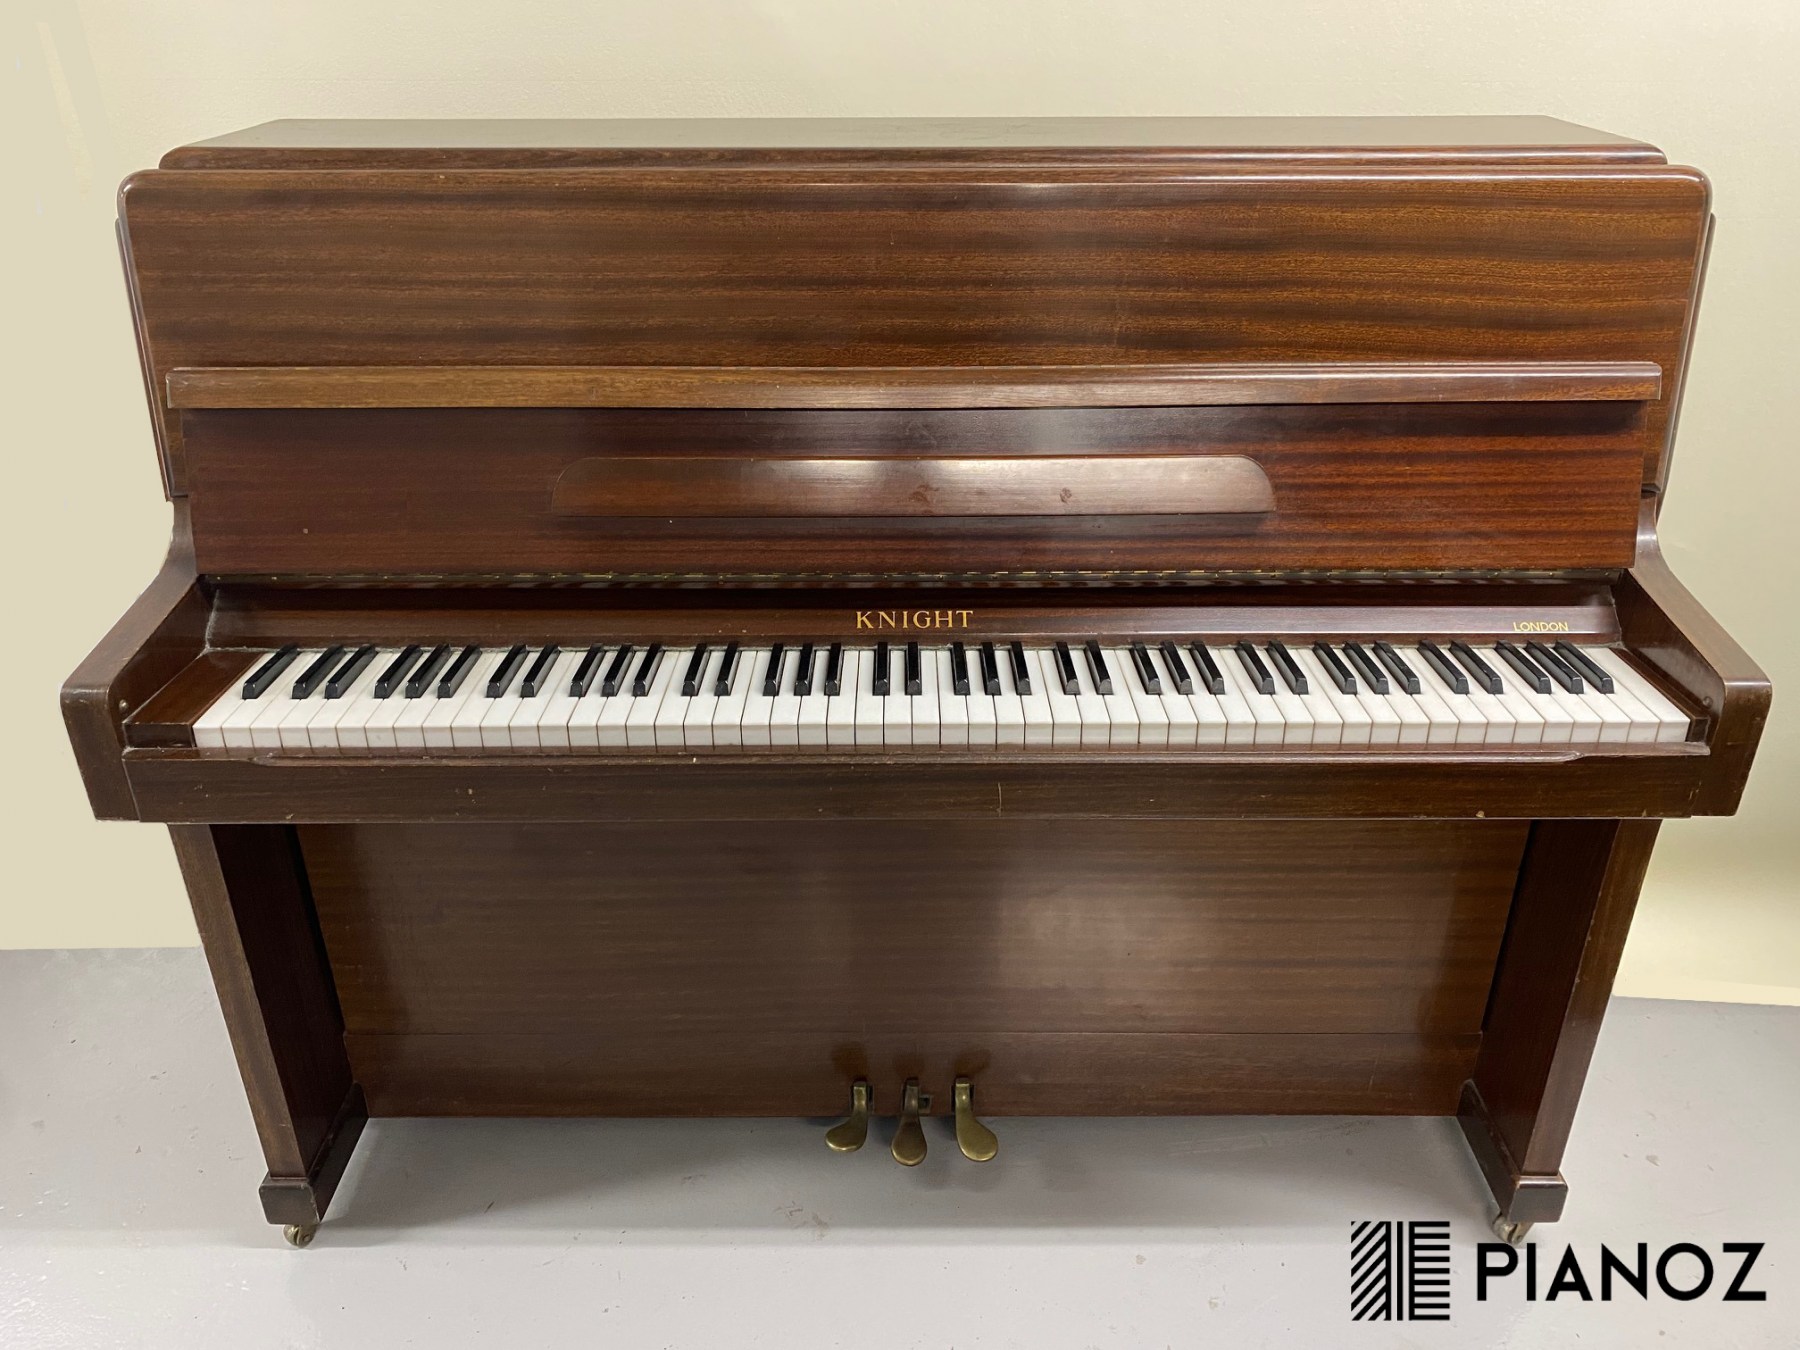 Knight K10 Upright Piano piano for sale in UK